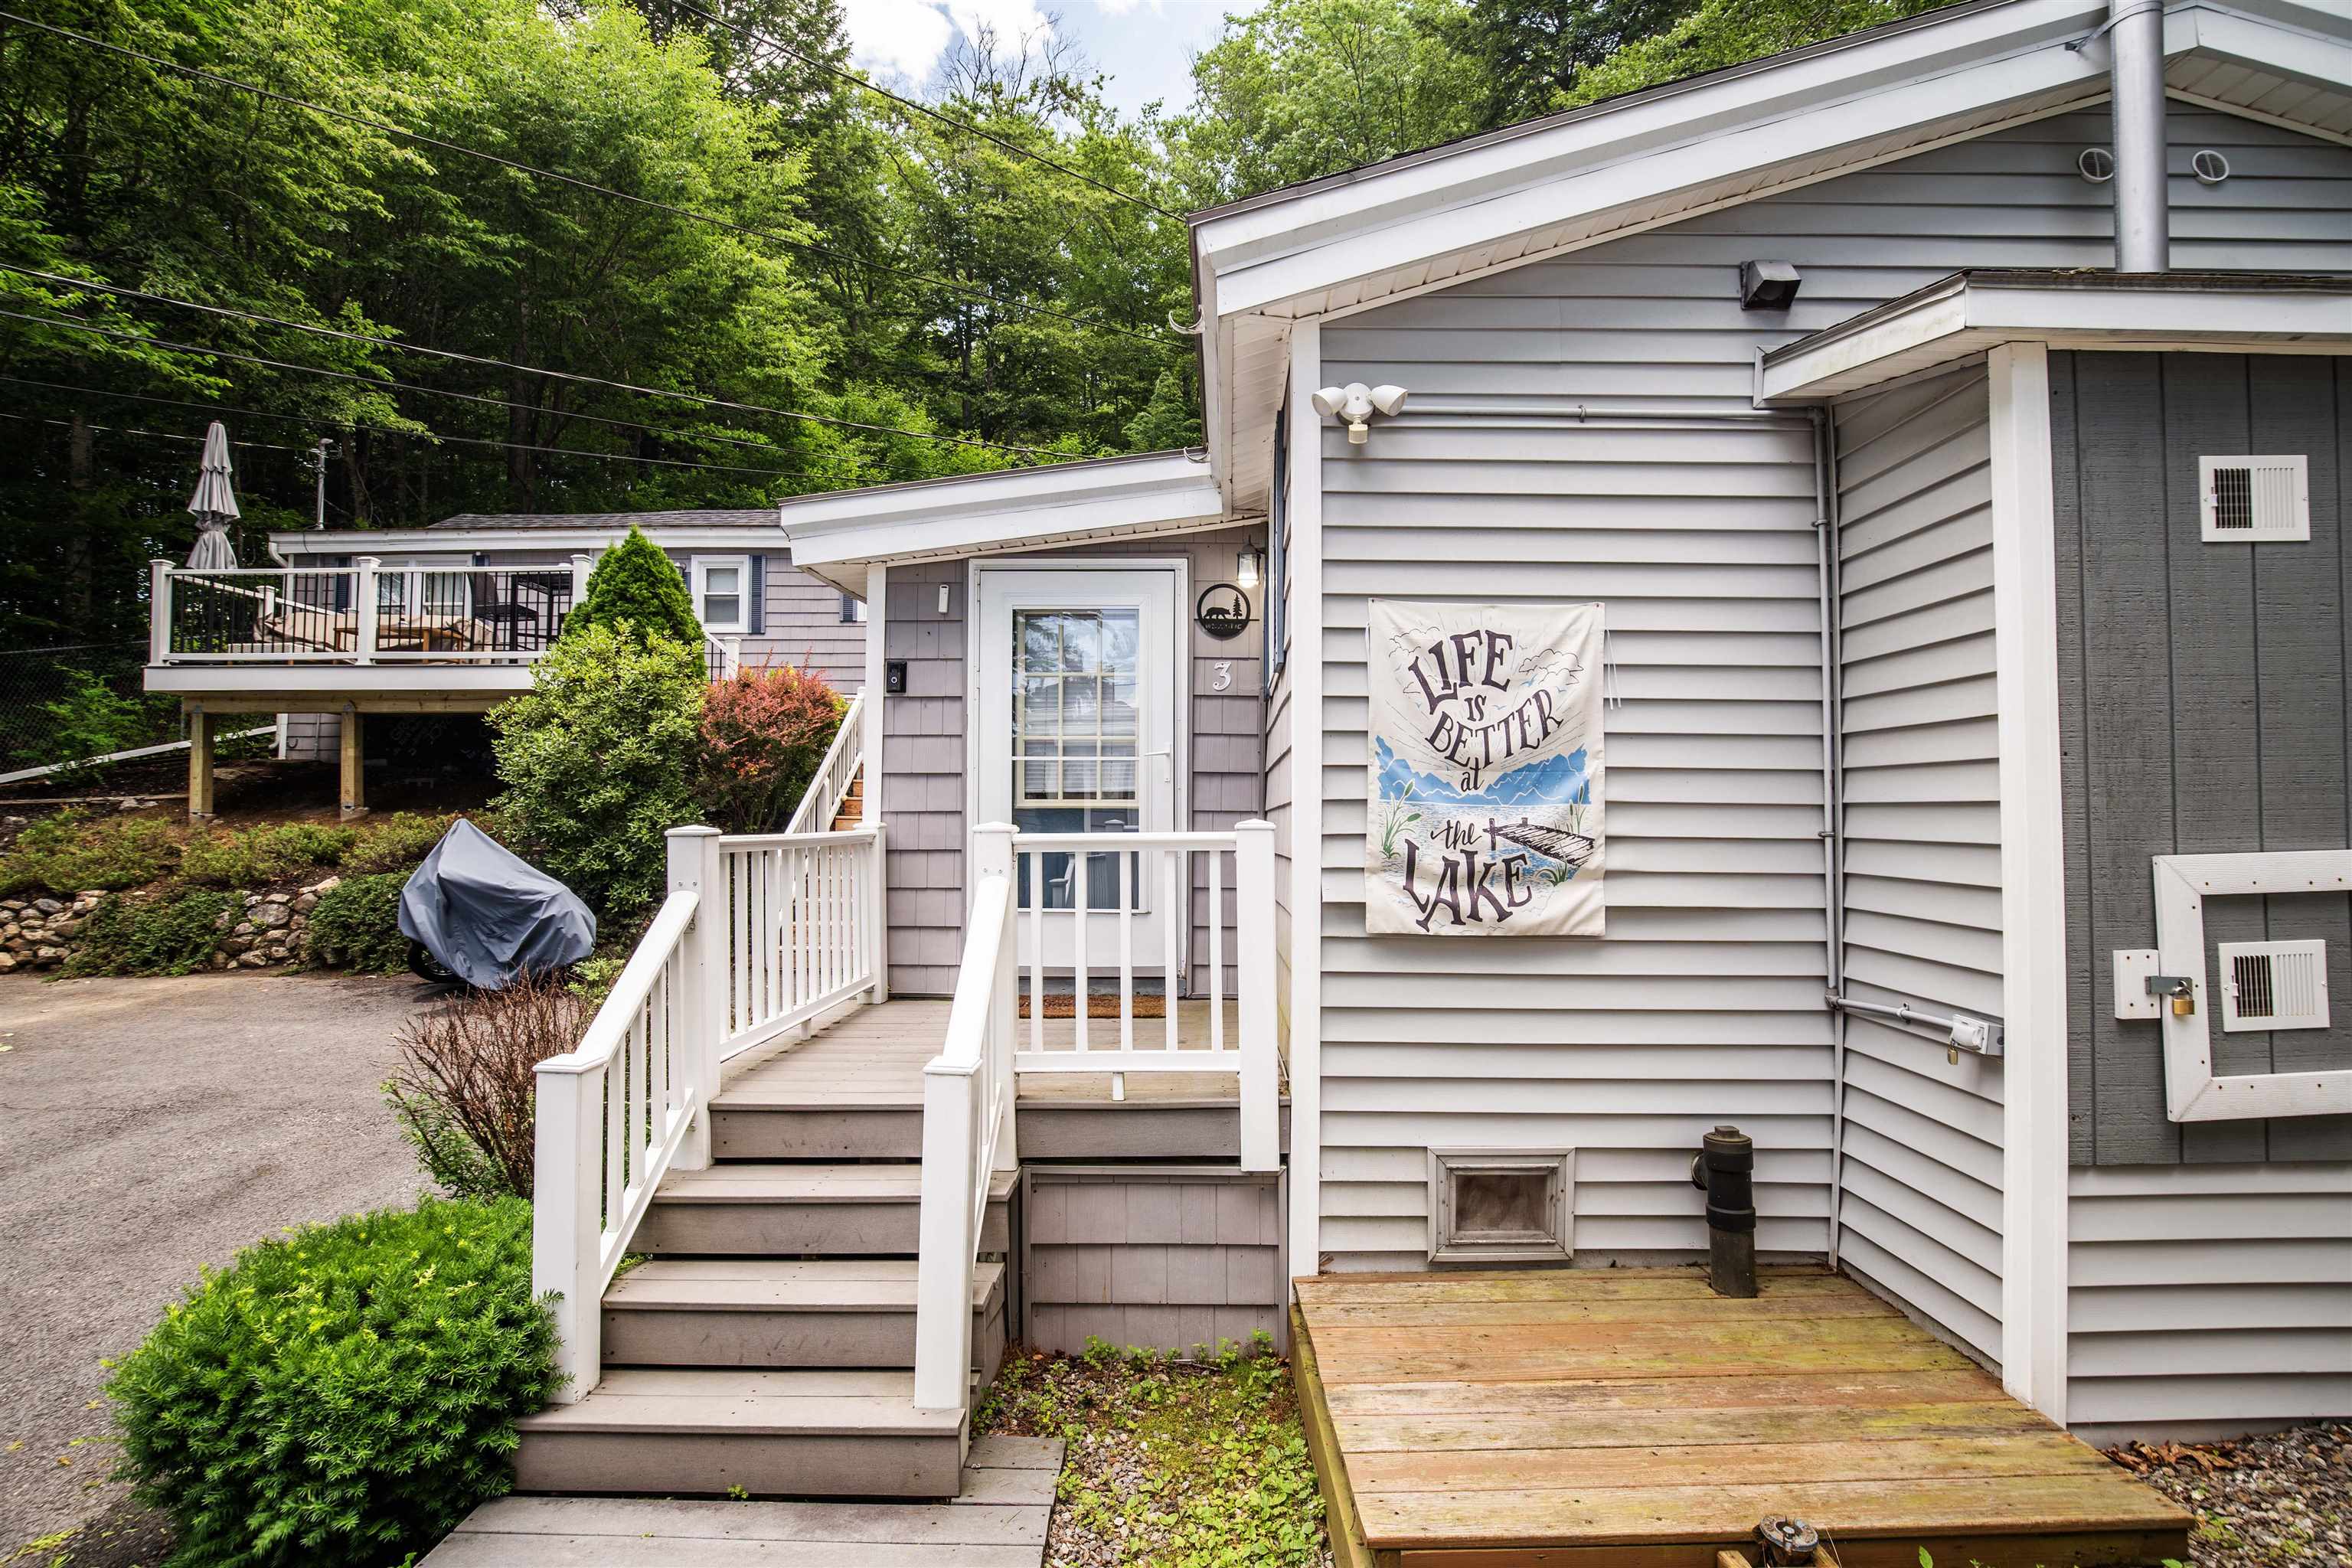 845 Weirs Boulevard 3, Laconia, NH 